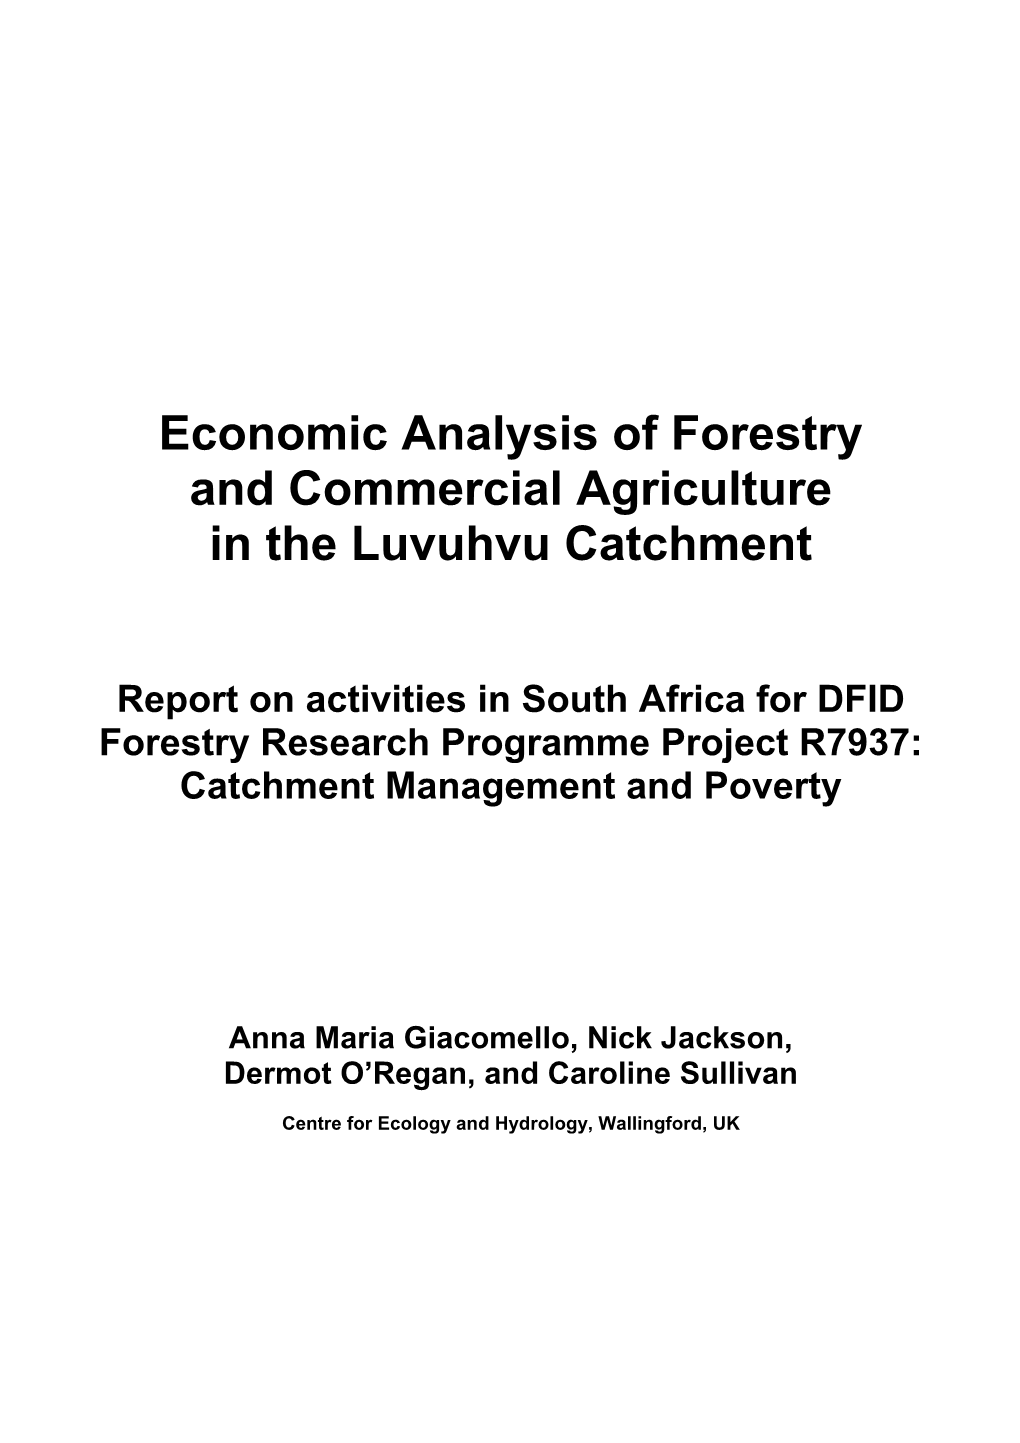 Economic Analysis of Forestry and Commercial Agriculture in the Luvuhvu Catchment